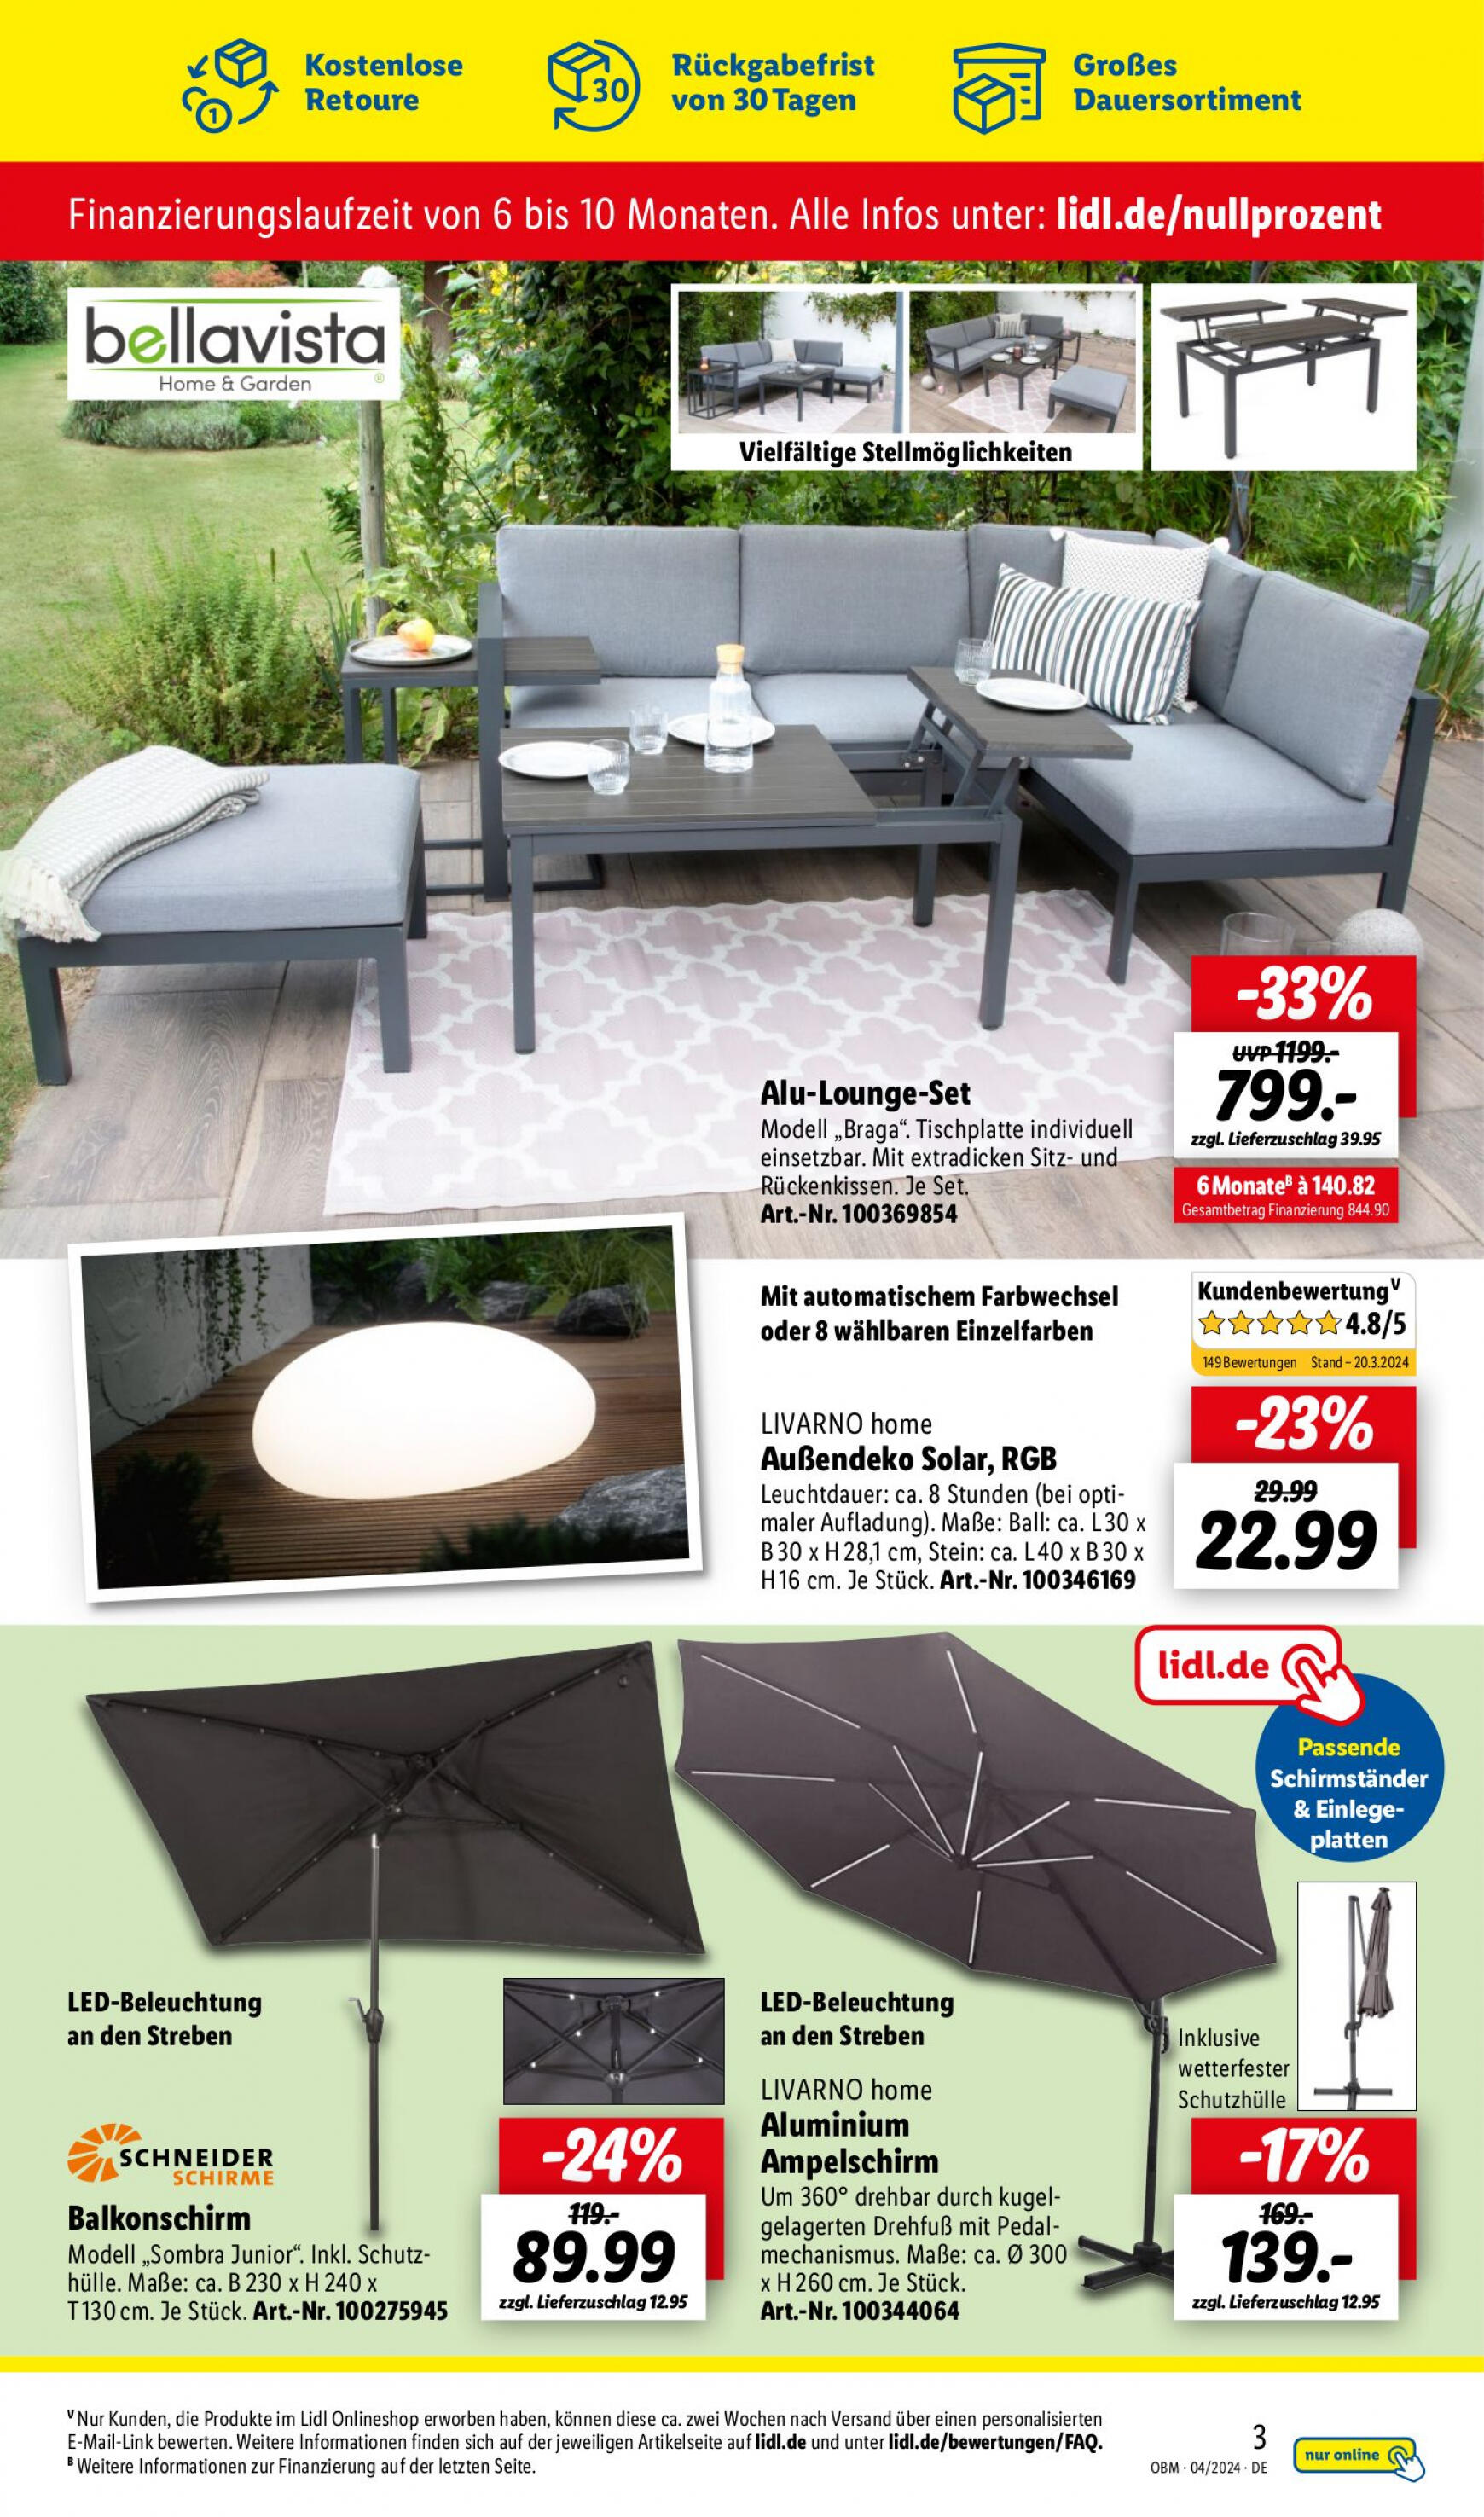 lidl - Flyer Lidl - Aktuelle Onlineshop-Highlights aktuell 01.04. - 30.04. - page: 3